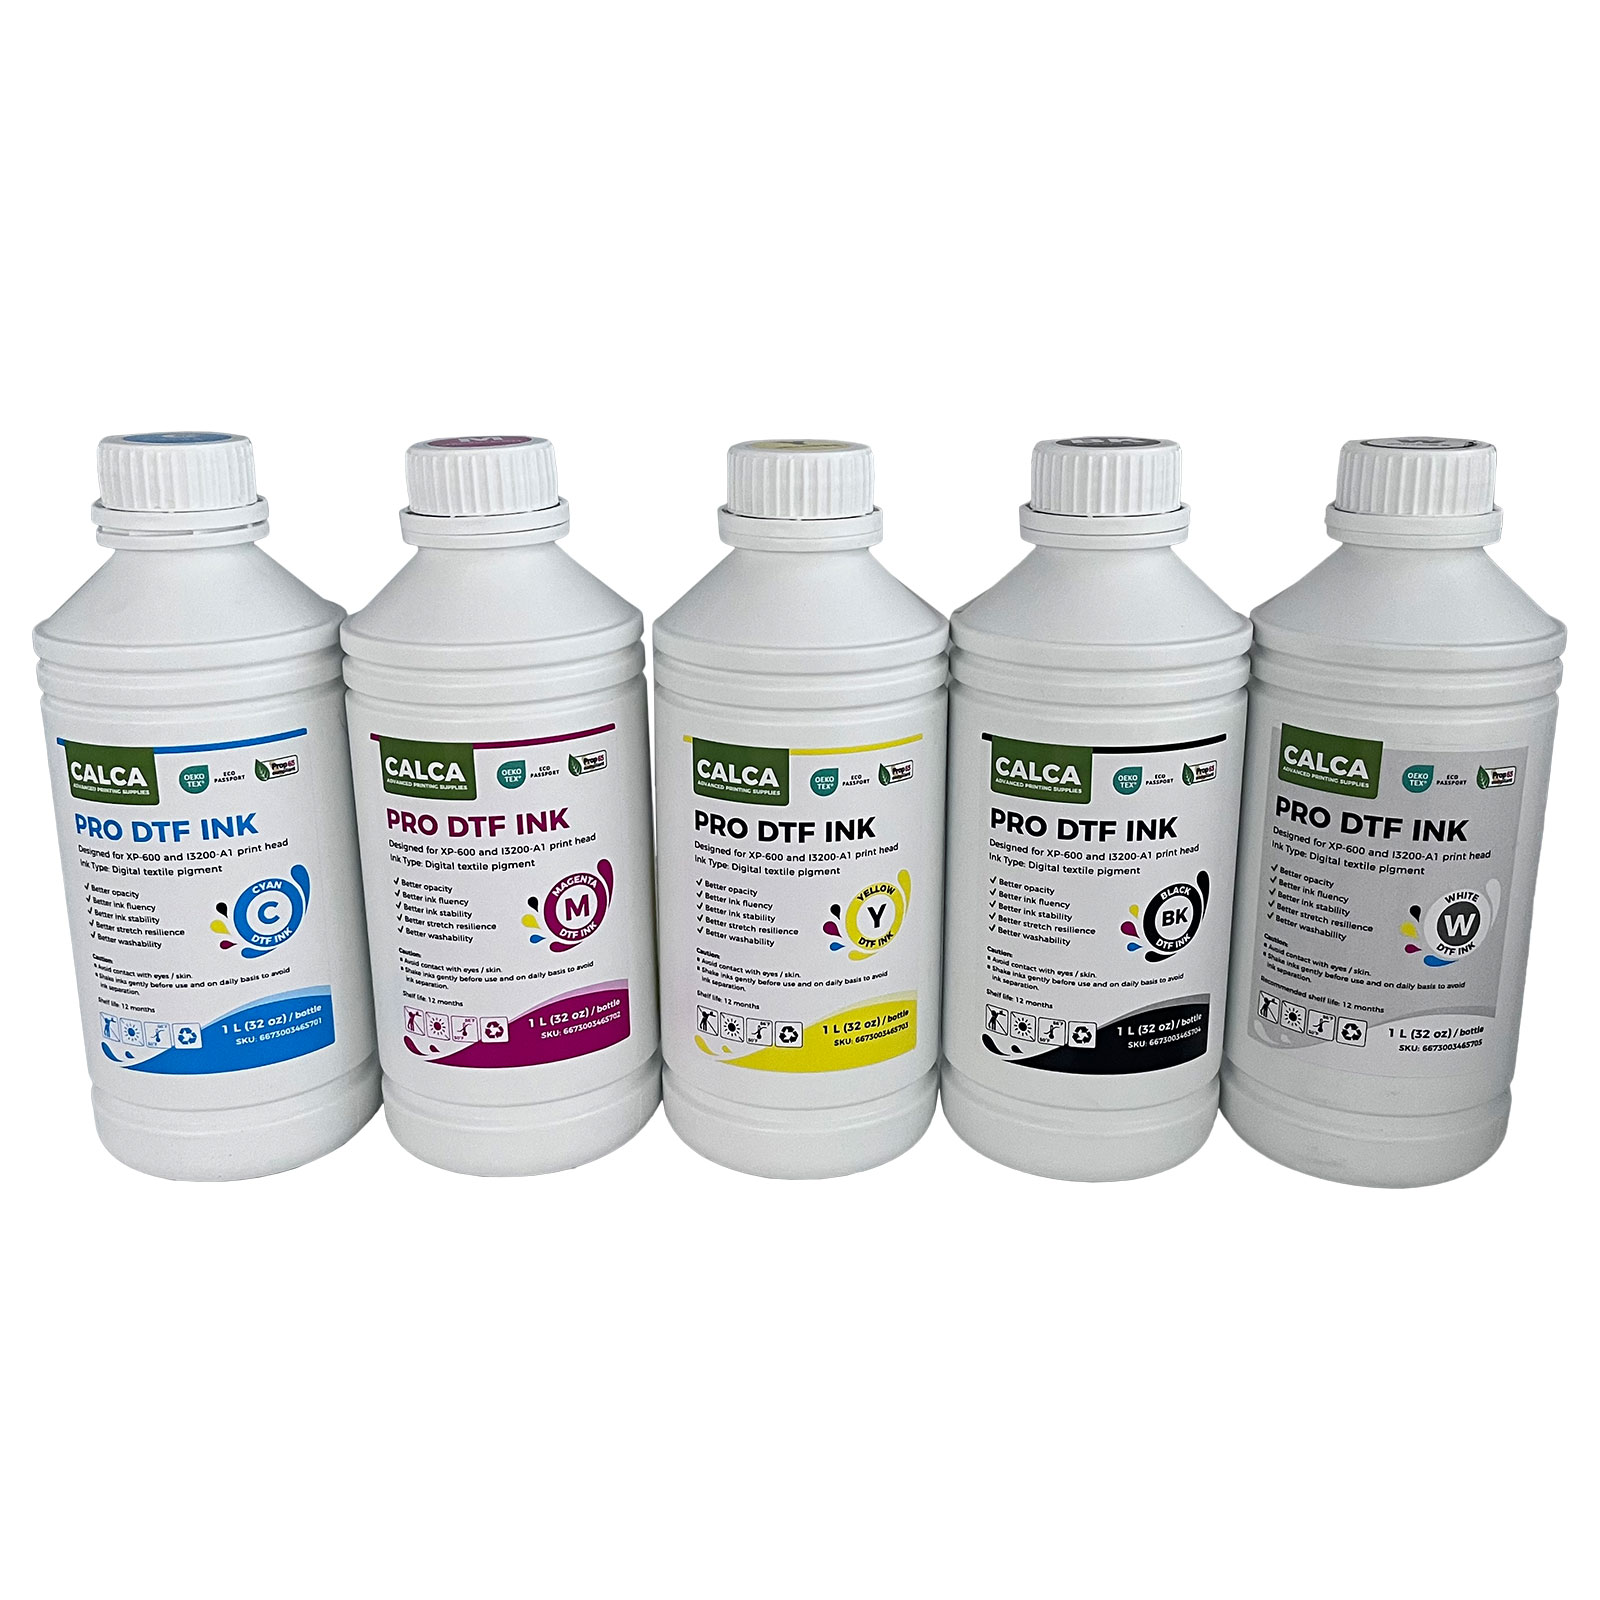 CALCA PRO Direct to Transfer Film Ink for Epson Printheads. 32 oz, Bottle of 1L, Water-based DTF Inks